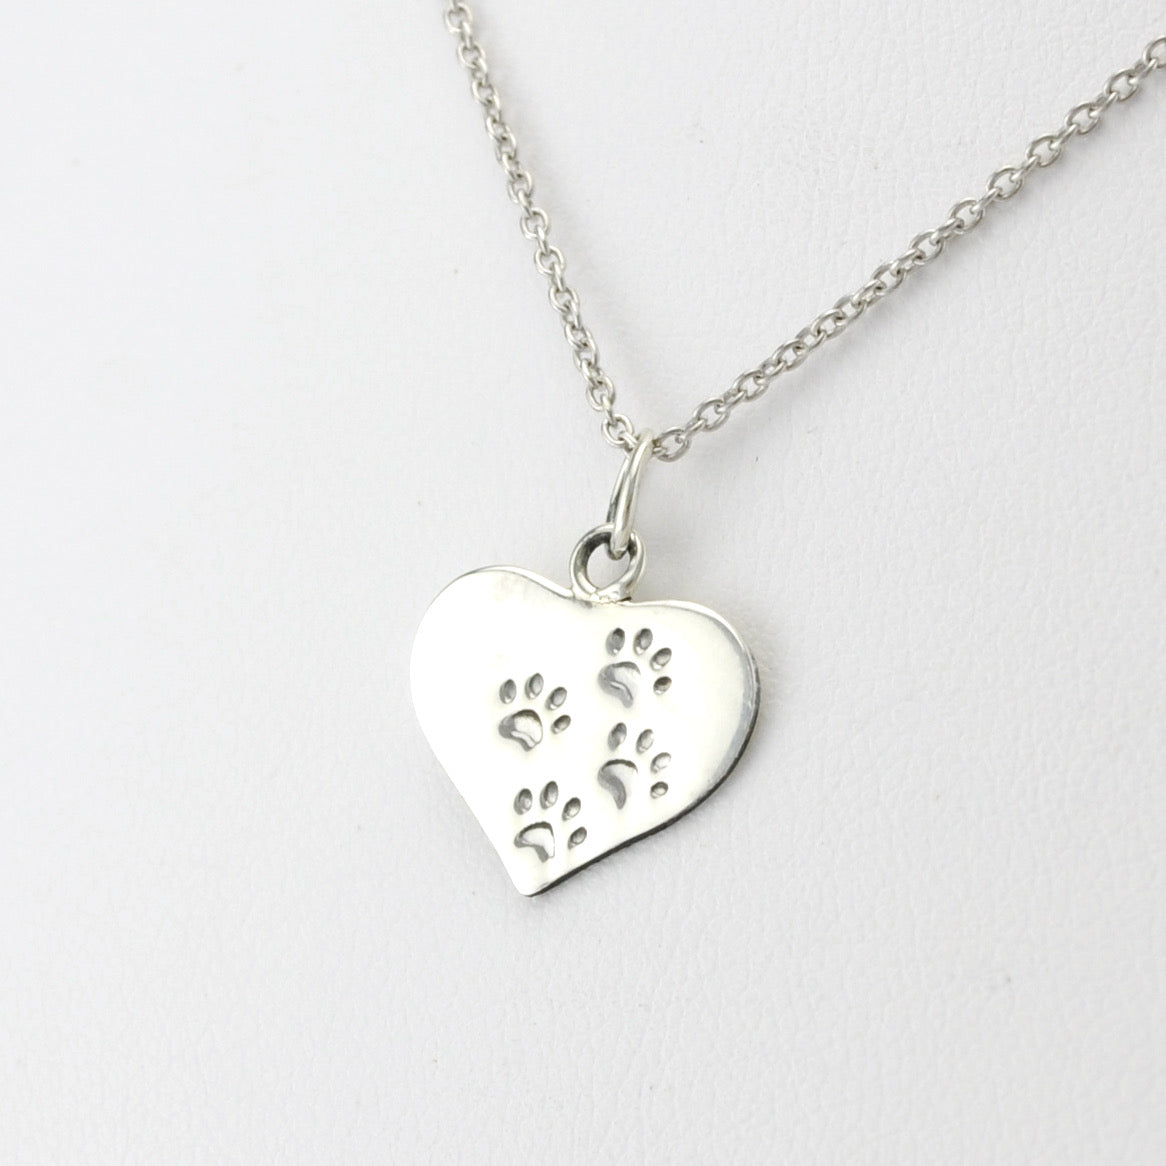 Silver Heart with Paws Necklace